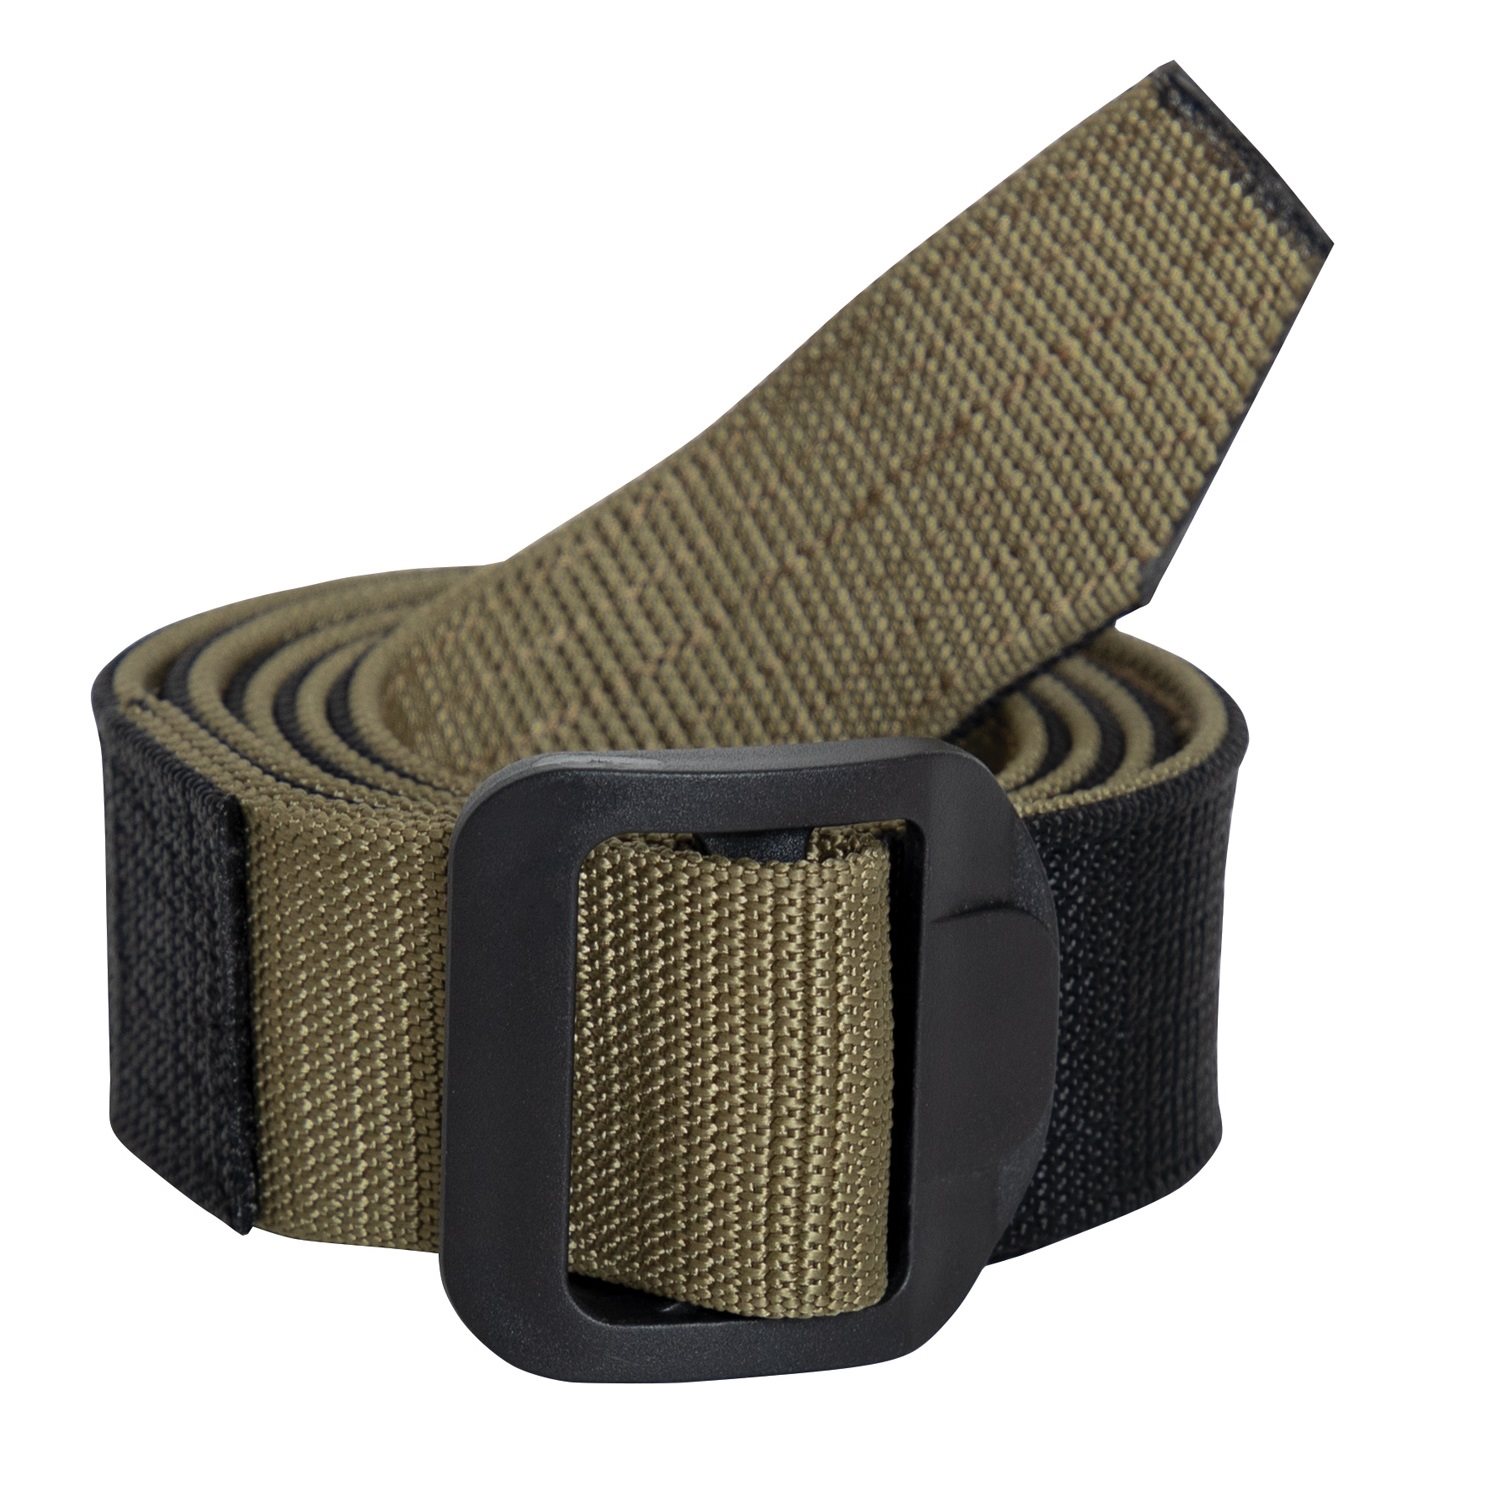 ROTHCO Reversible Airport Friendly Riggers Belt COYOTE/BLACK | MILITARY ...